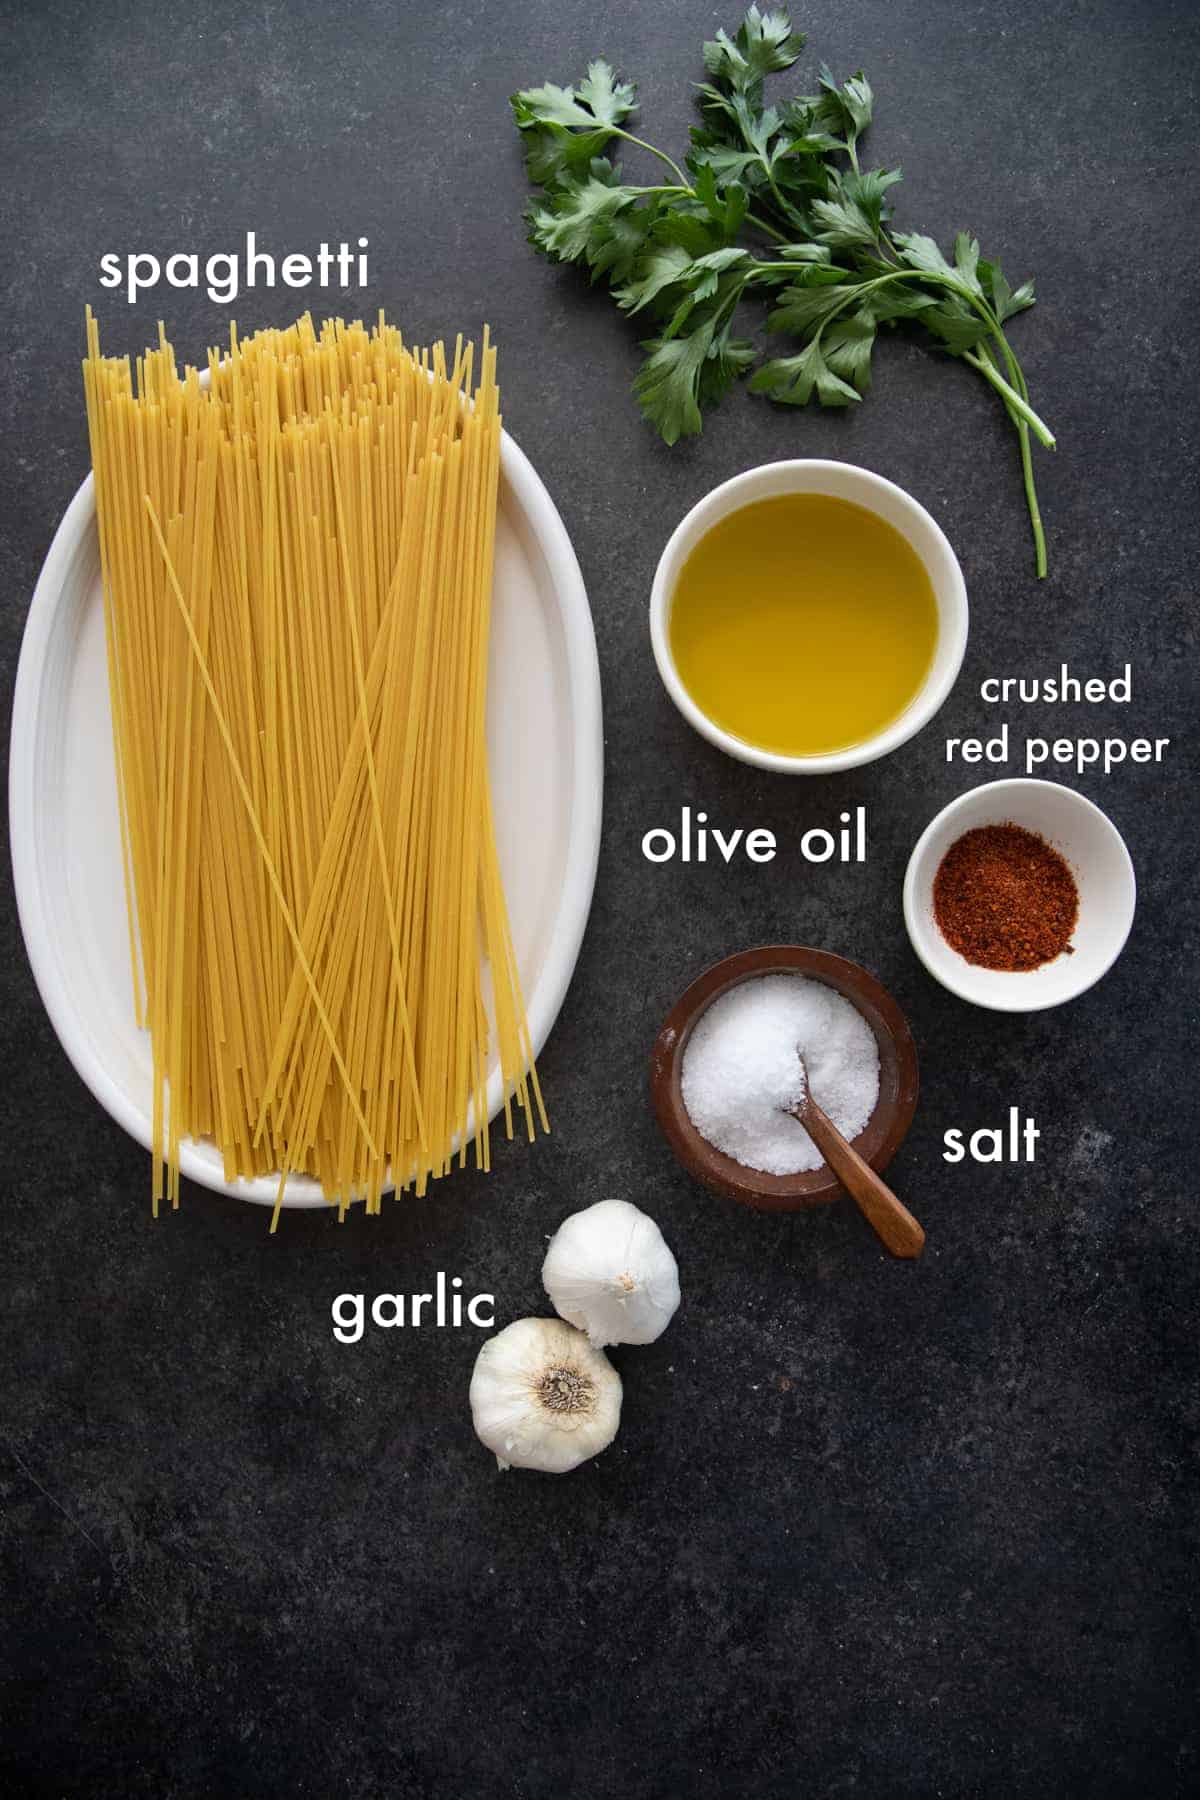 You need spaghetti, olive oil, garlic, salt, pepper for this recipe.